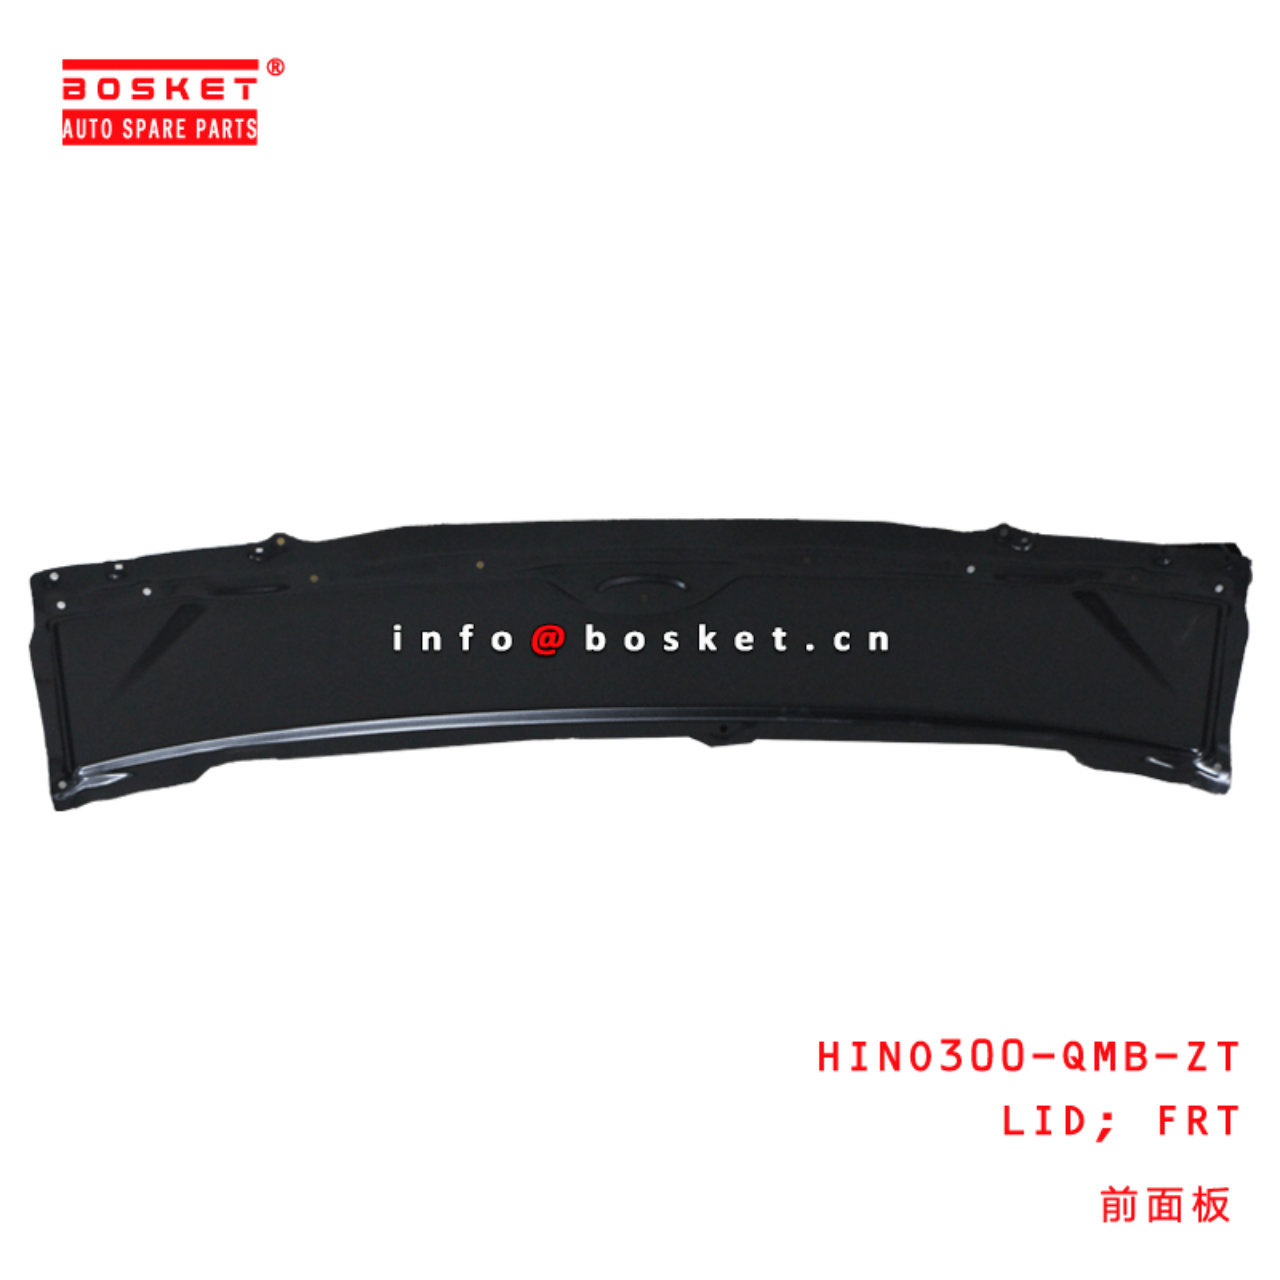 HINO300-QMB-ZT Front Lid Suitable For HINO 300 